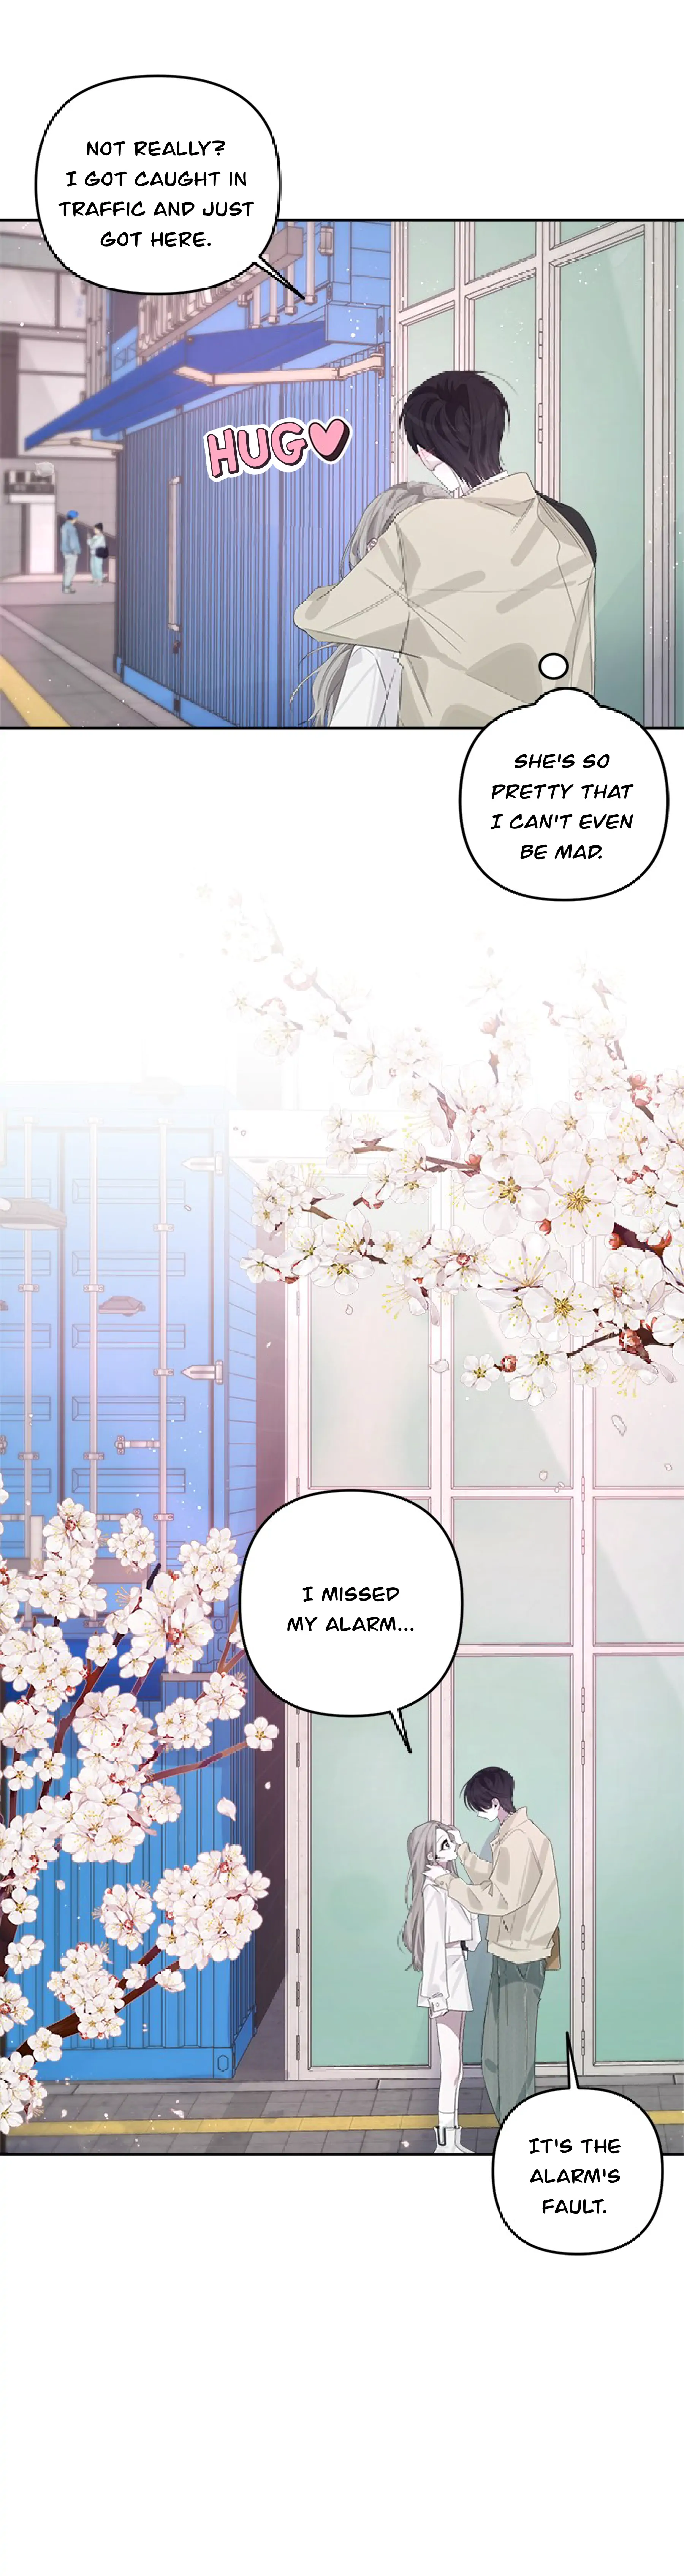 Lonely Spring chapter 0